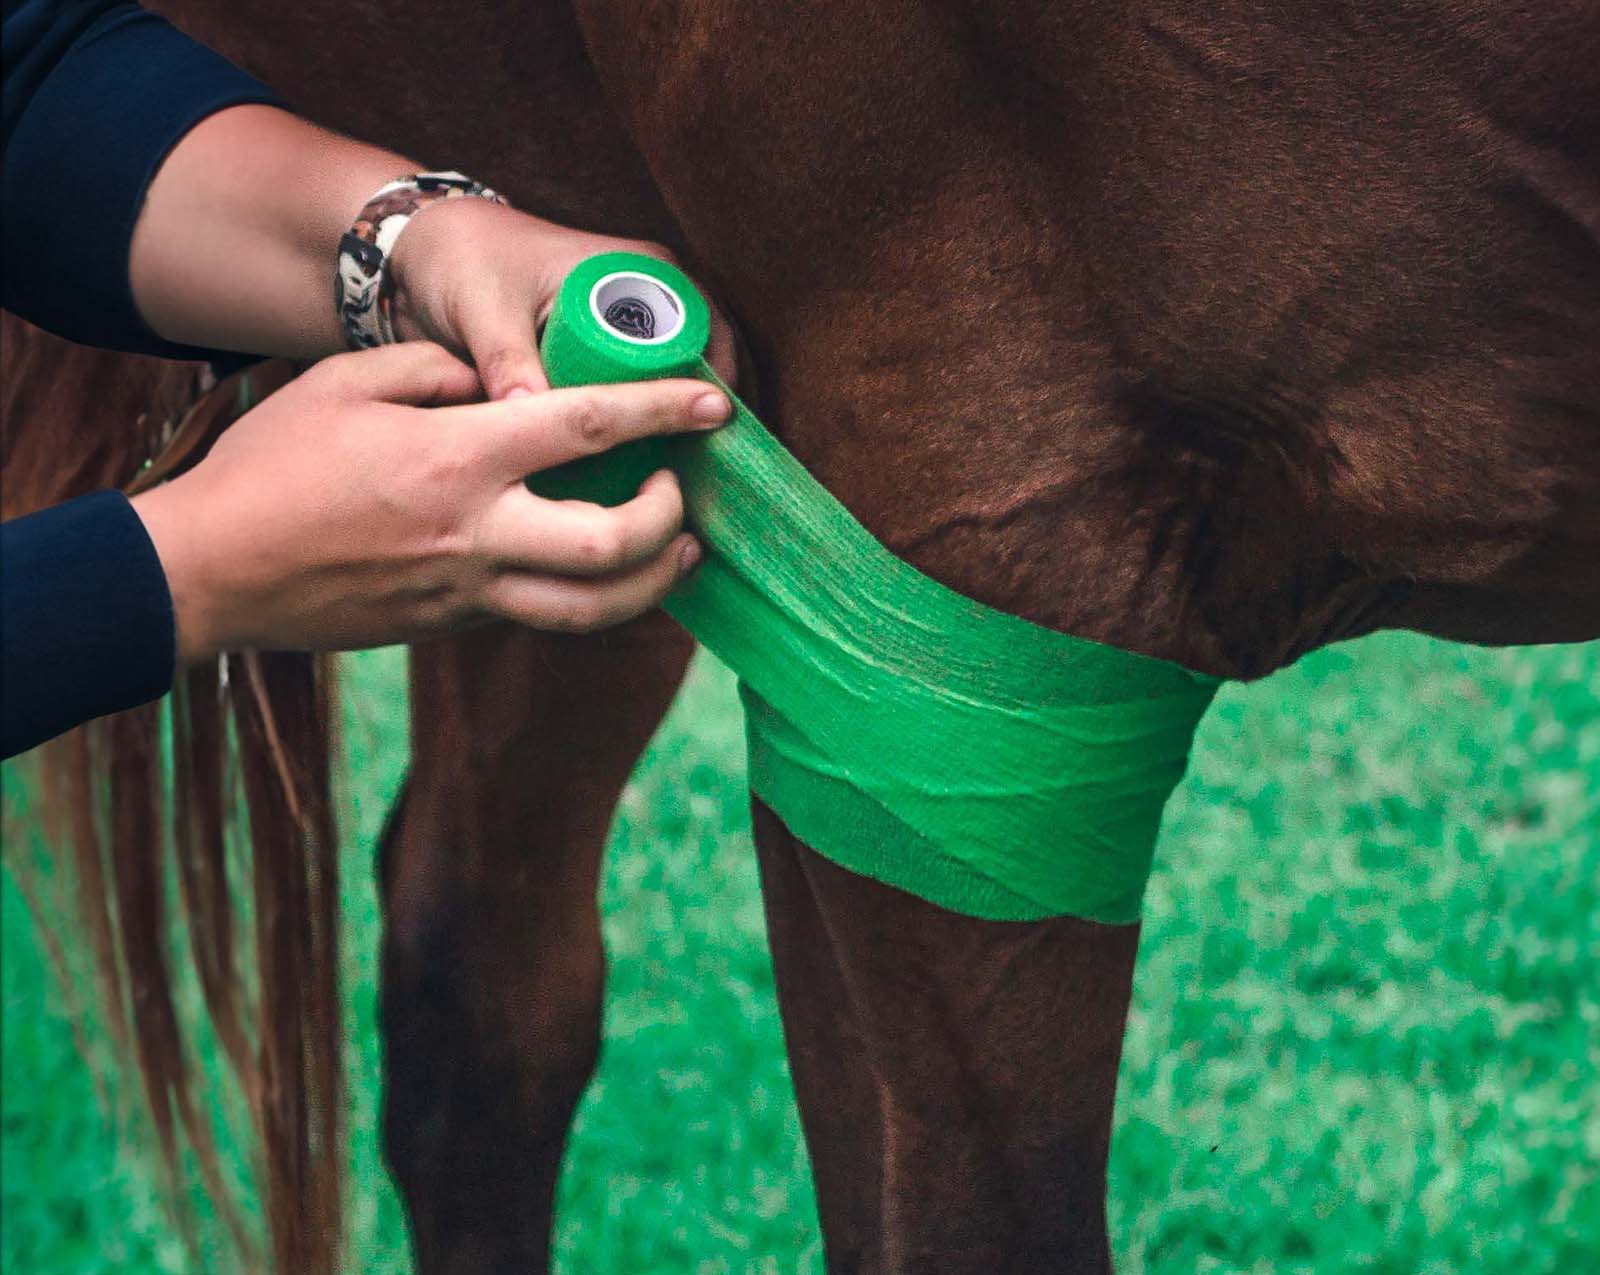 WildCow Green Vet Wrap in 4 Inch Size - Wrapping a Horse's Leg